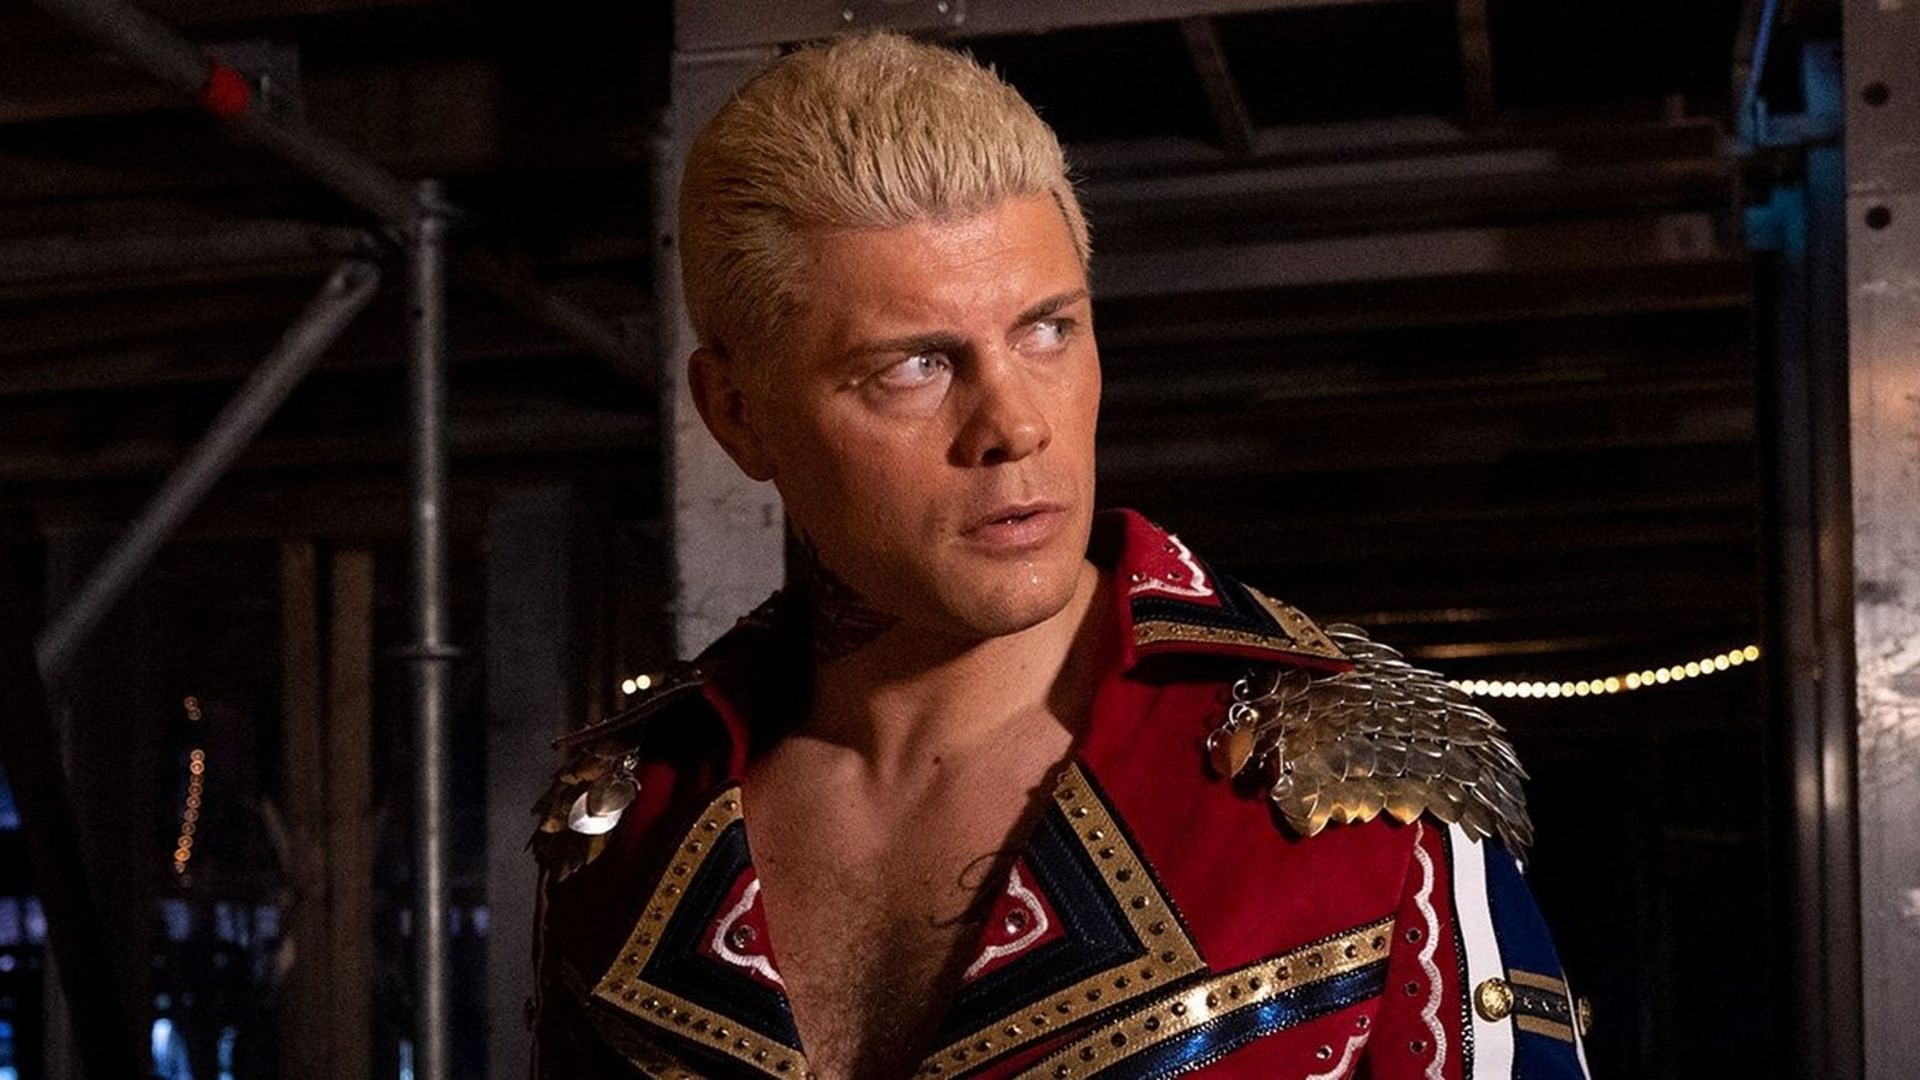 Nick Aldis previously feuded with Cody Rhodes outside WWE